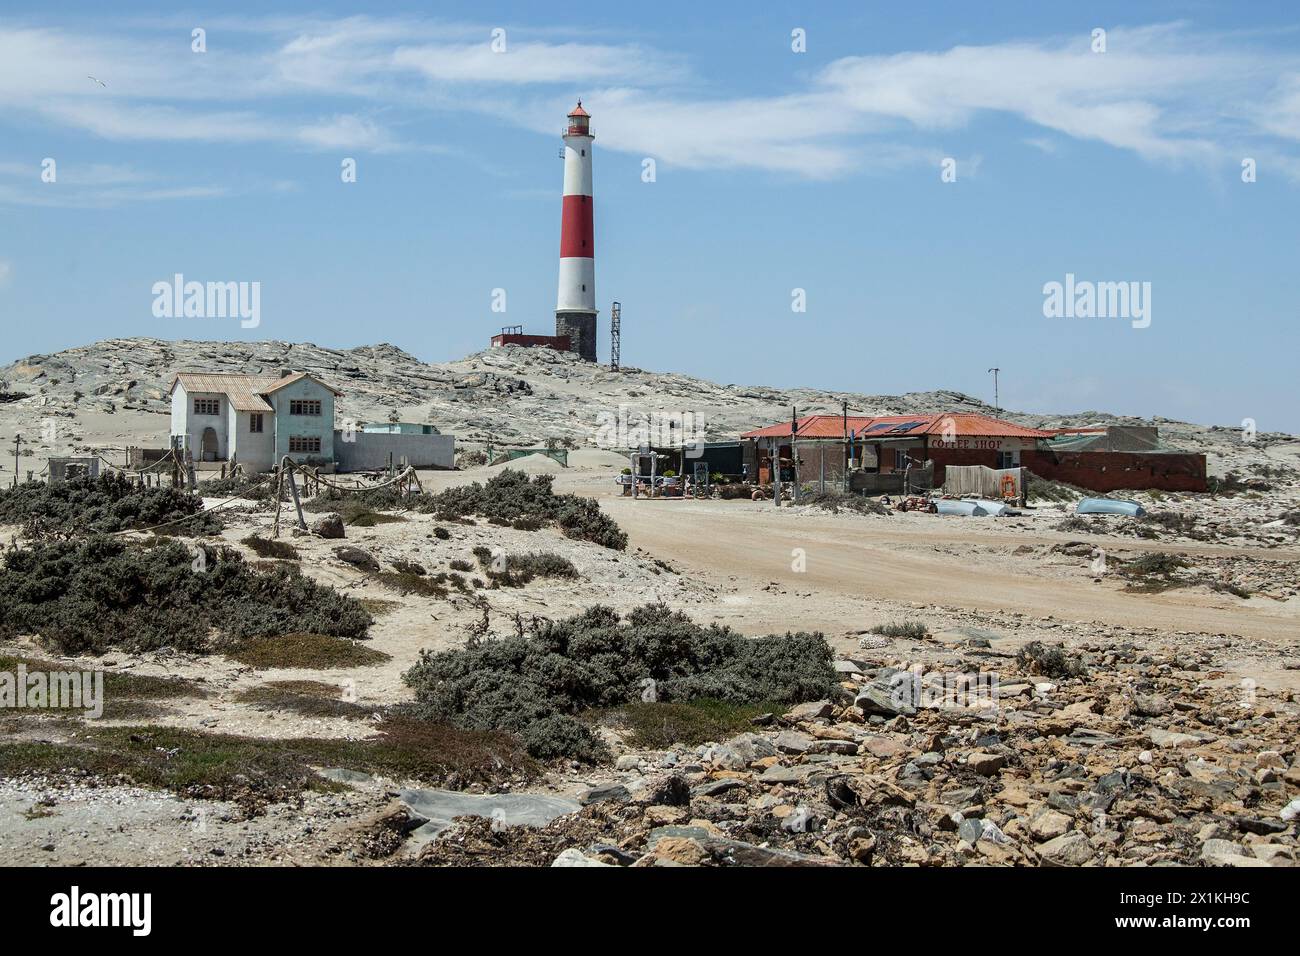 The old coastguard station and lighthouse at at Diaz Point near Luderitz in Namibia. Stock Photo